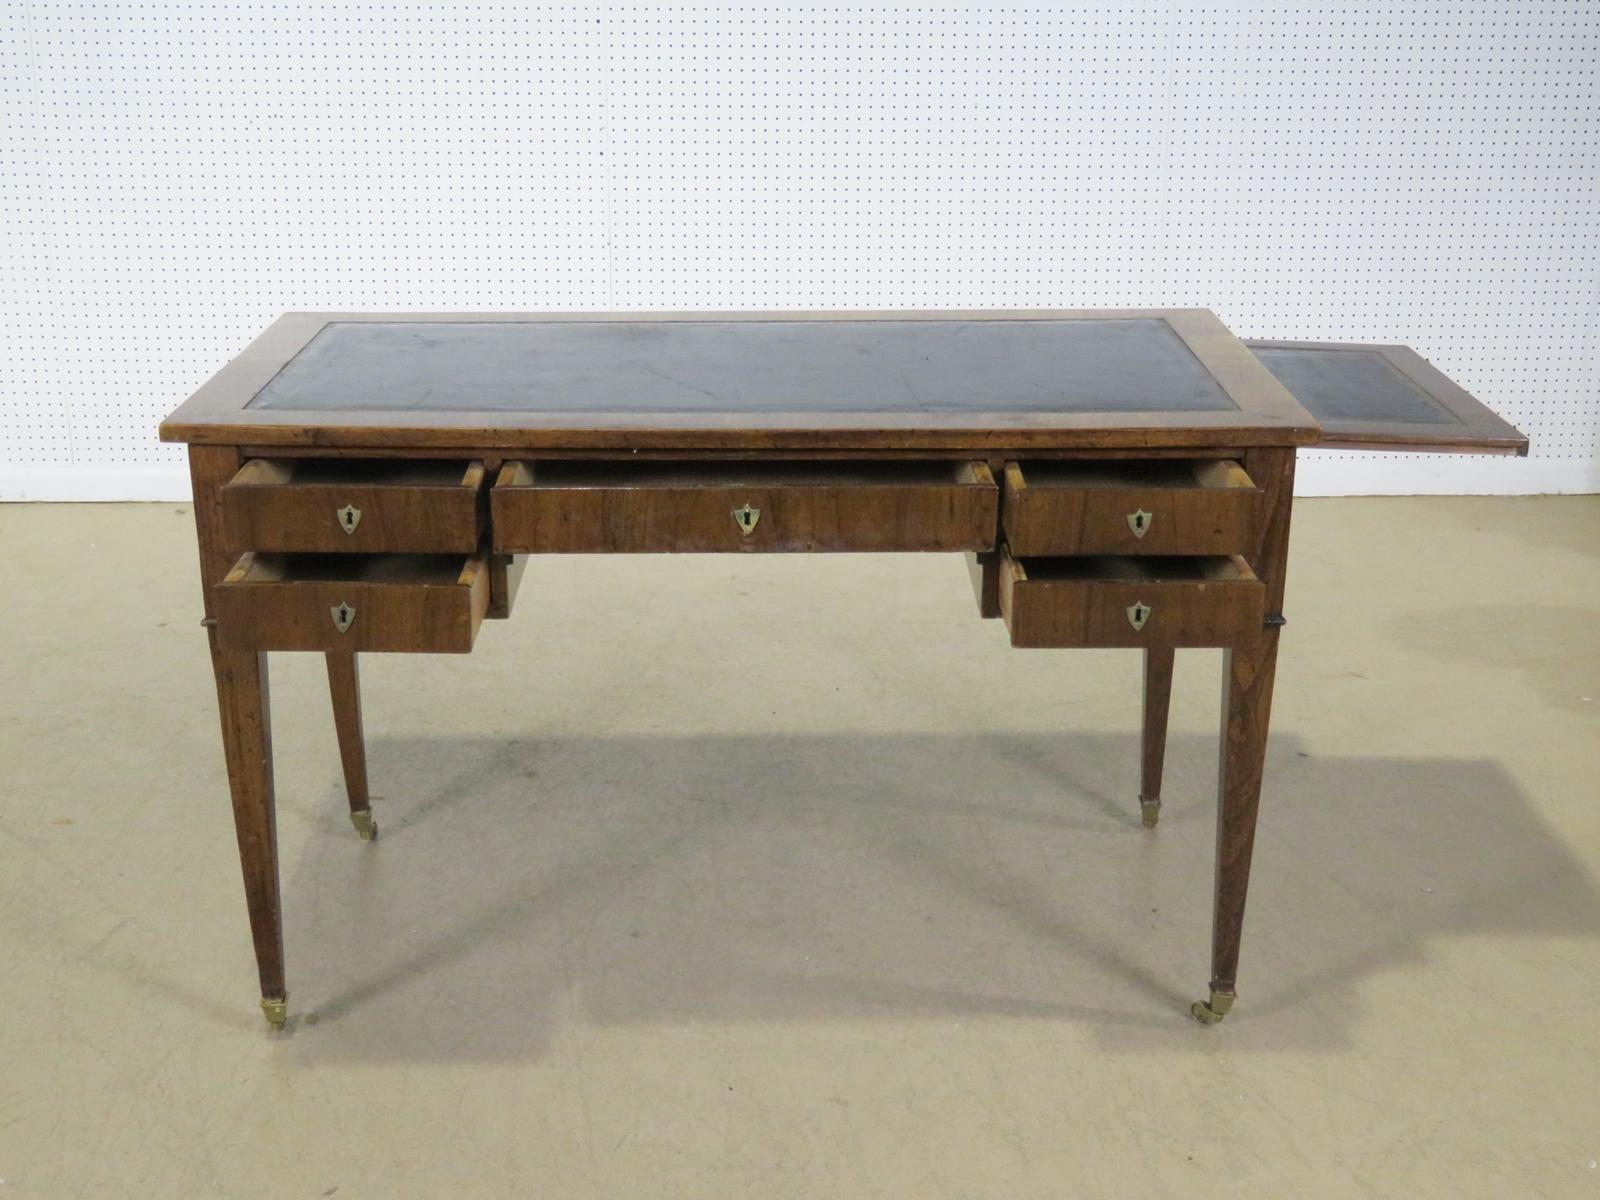 Baker Directoire style 5-drawer leather top writing desk with pull out writing surfaces. The desk is 72